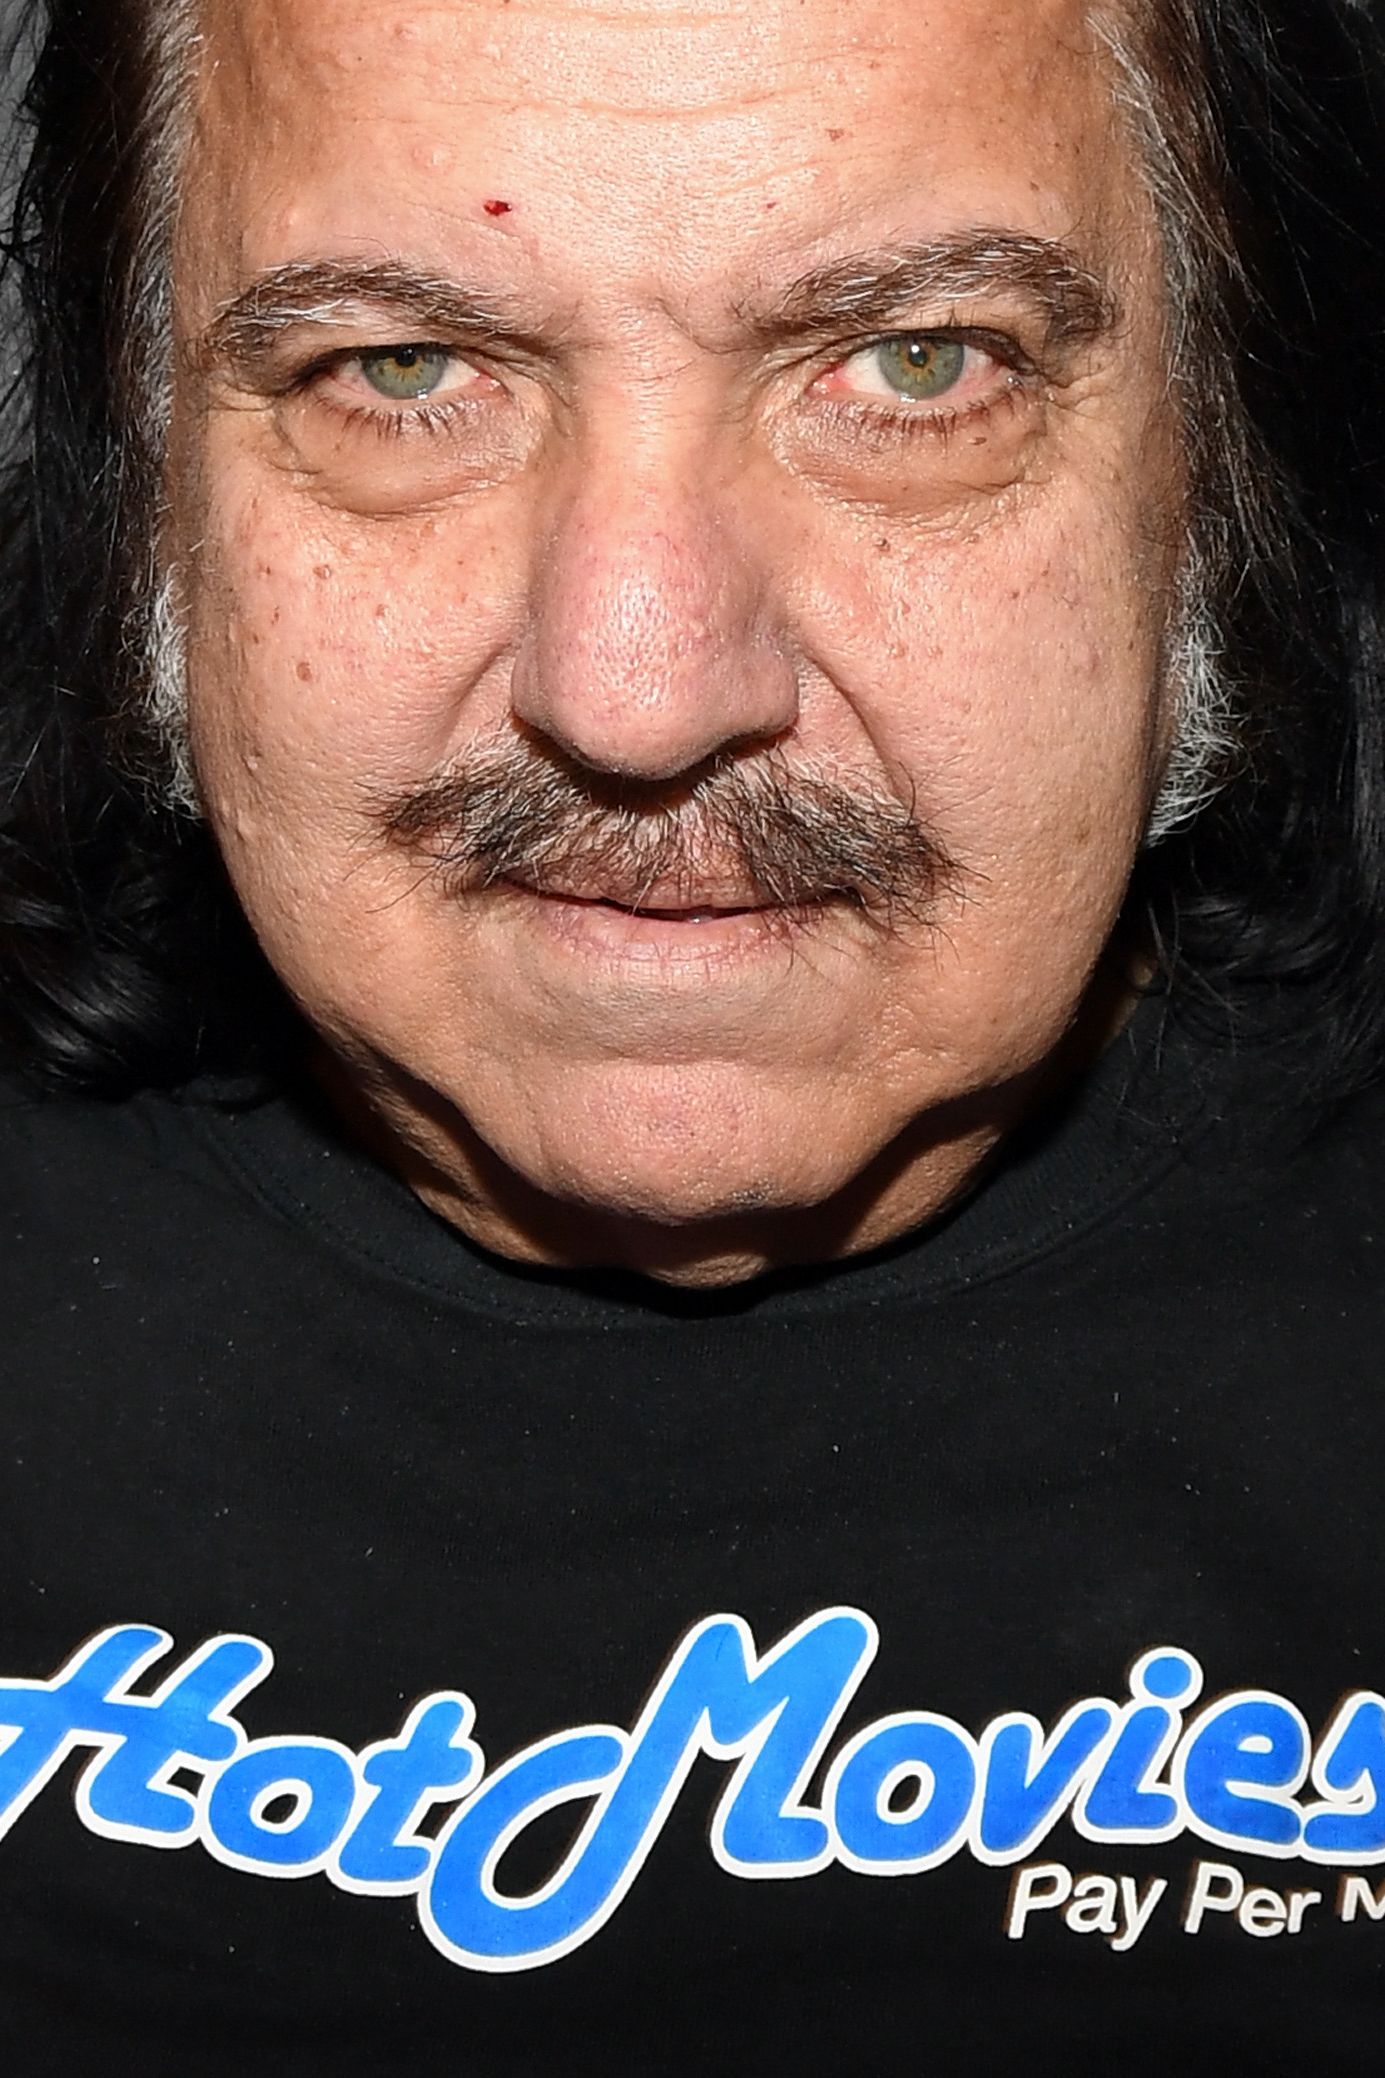 West Indies Real Rape Xxx Sex Video - Ron Jeremy, porn star, charged with sexually assaulting four women | CNN